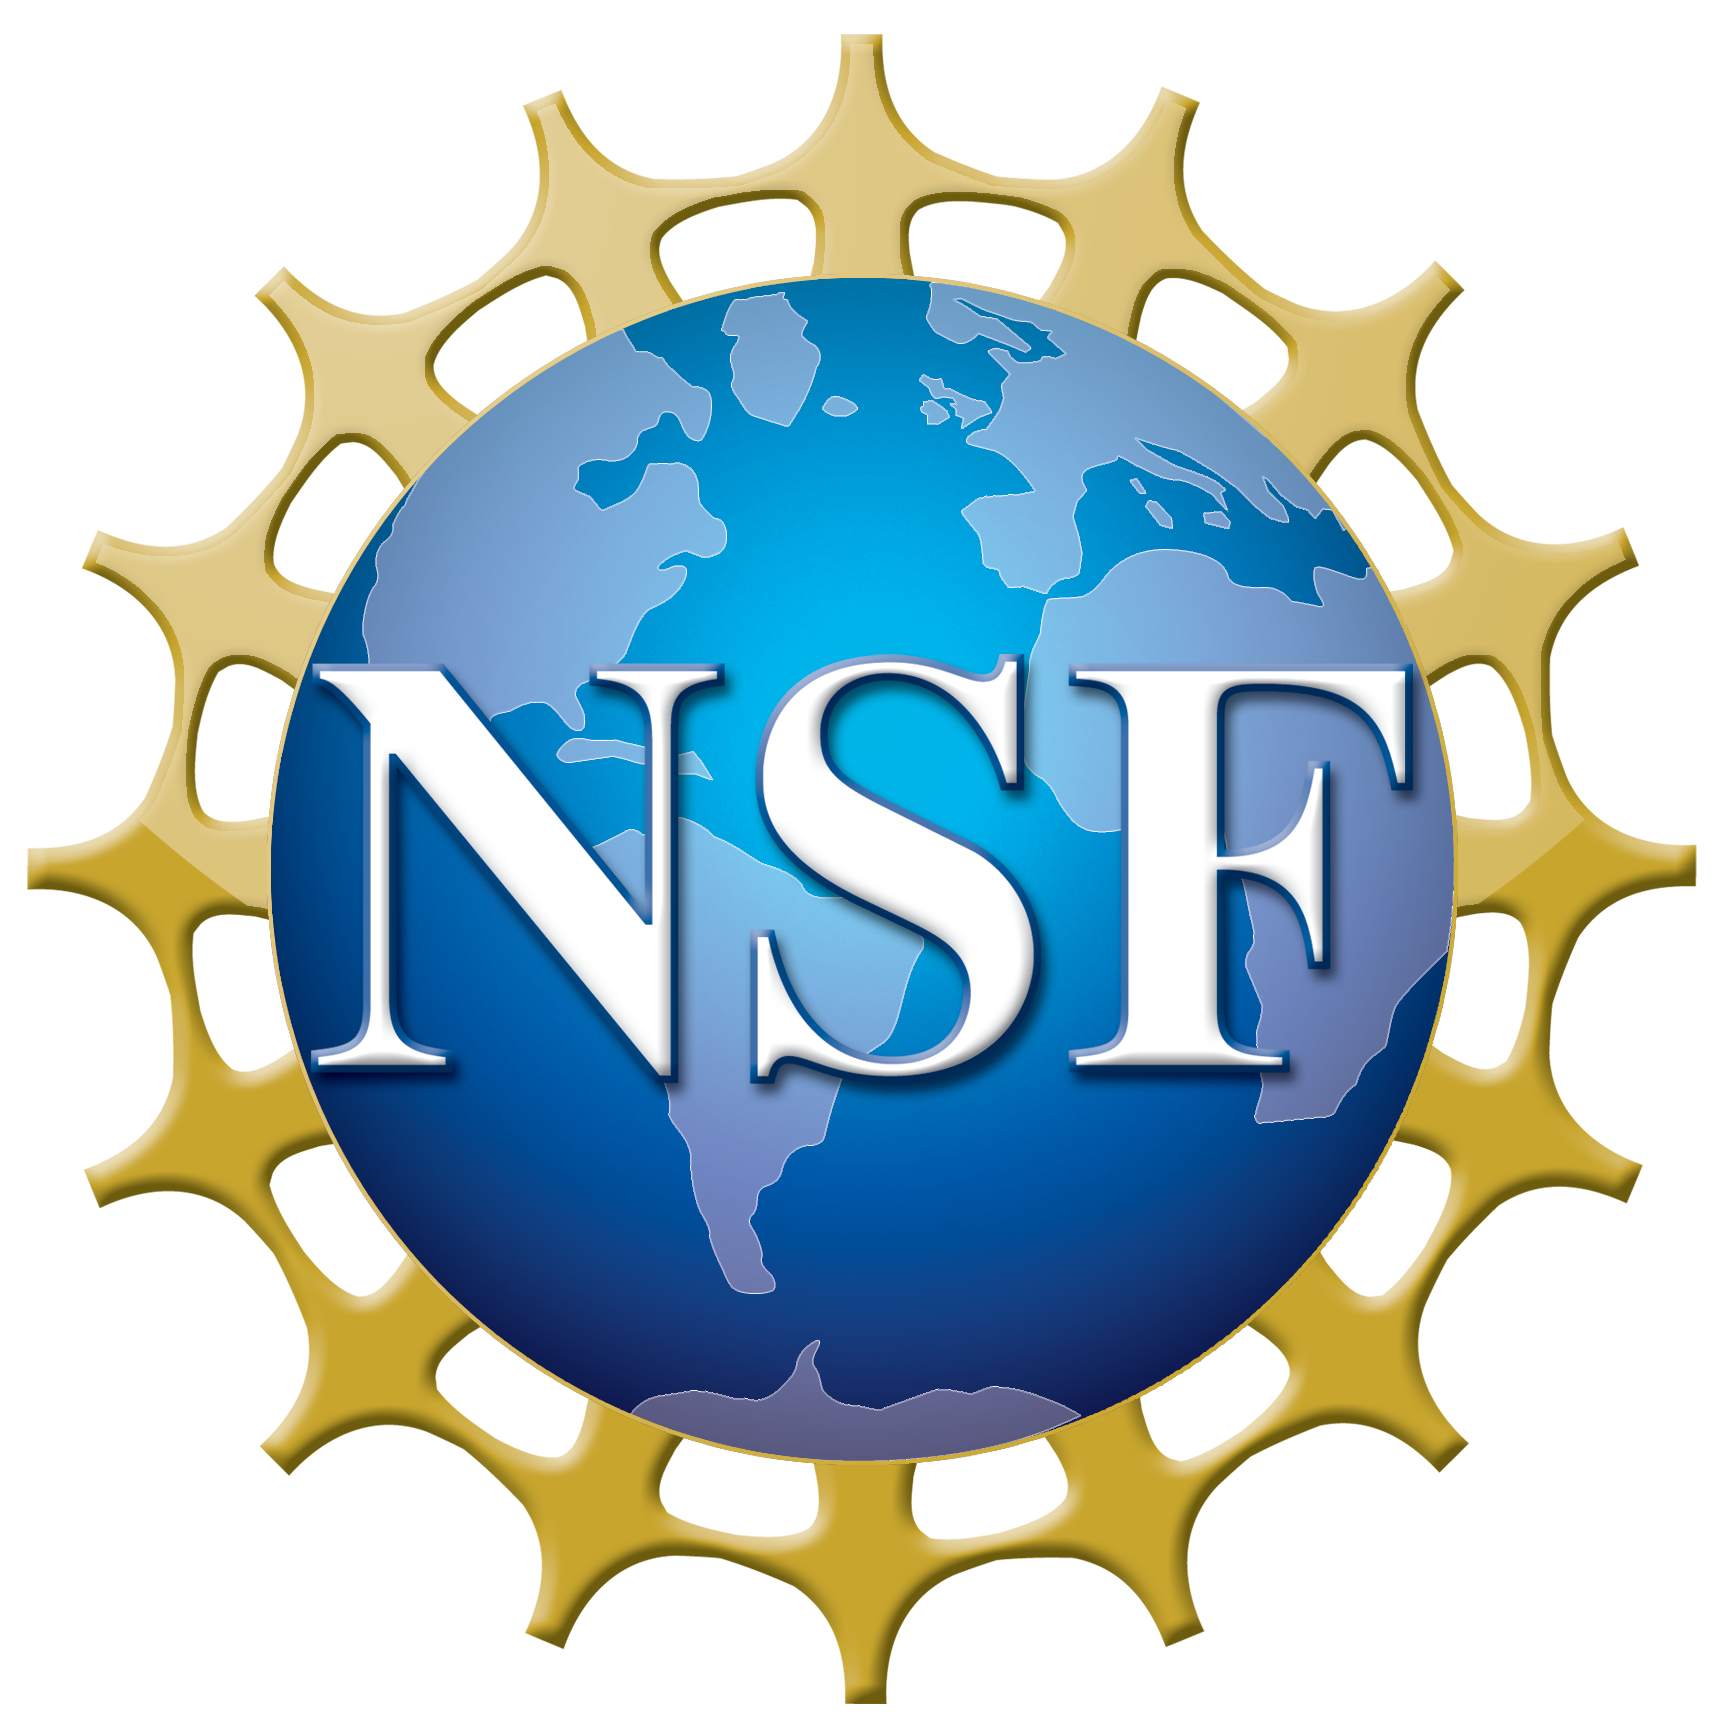 About the NSF’s Small Business Programs:

America’s Seed Fund powered by NSF awards $200 million annually to startups and small businesses, transforming scientific discovery into products and services with commercial and  societal impact. Startups working across almost all areas of science and technology can receive up to $1.75 million to support research and development (R&D), helping de-risk technology for commercial success. America’s Seed Fund is congressionally mandated through the Small Business Innovation Research (SBIR) program. The NSF is an independent federal agency with a budget of about $8.1 billion that supports fundamental research and education across all fields of science and engineering. For more information, visit https://seedfund.nsf.gov/. #NSFFUNDED, #NSFSTORIES
